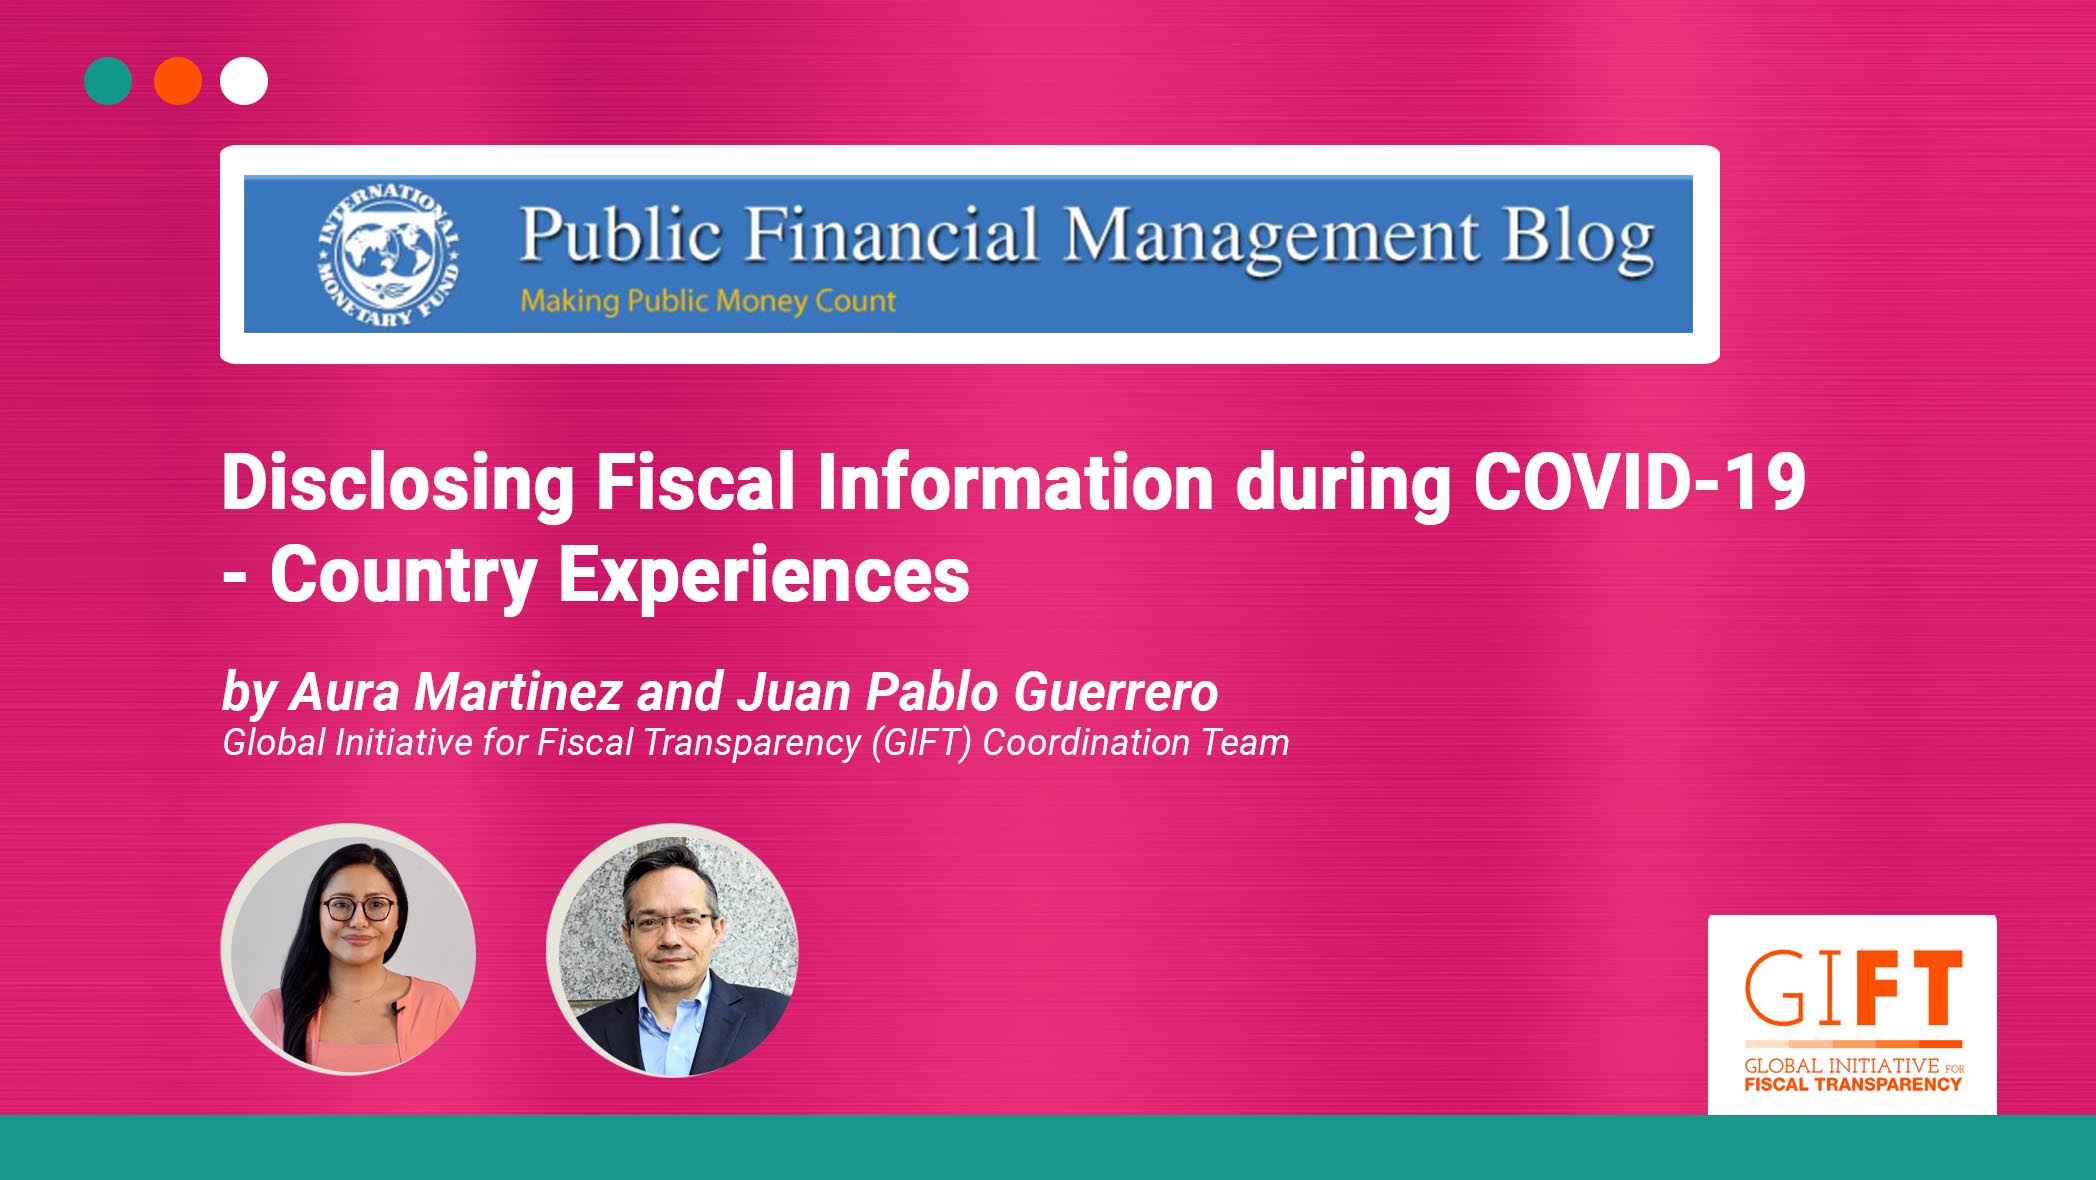 Disclosing Fiscal Information during COVID-19 - Country Experiences